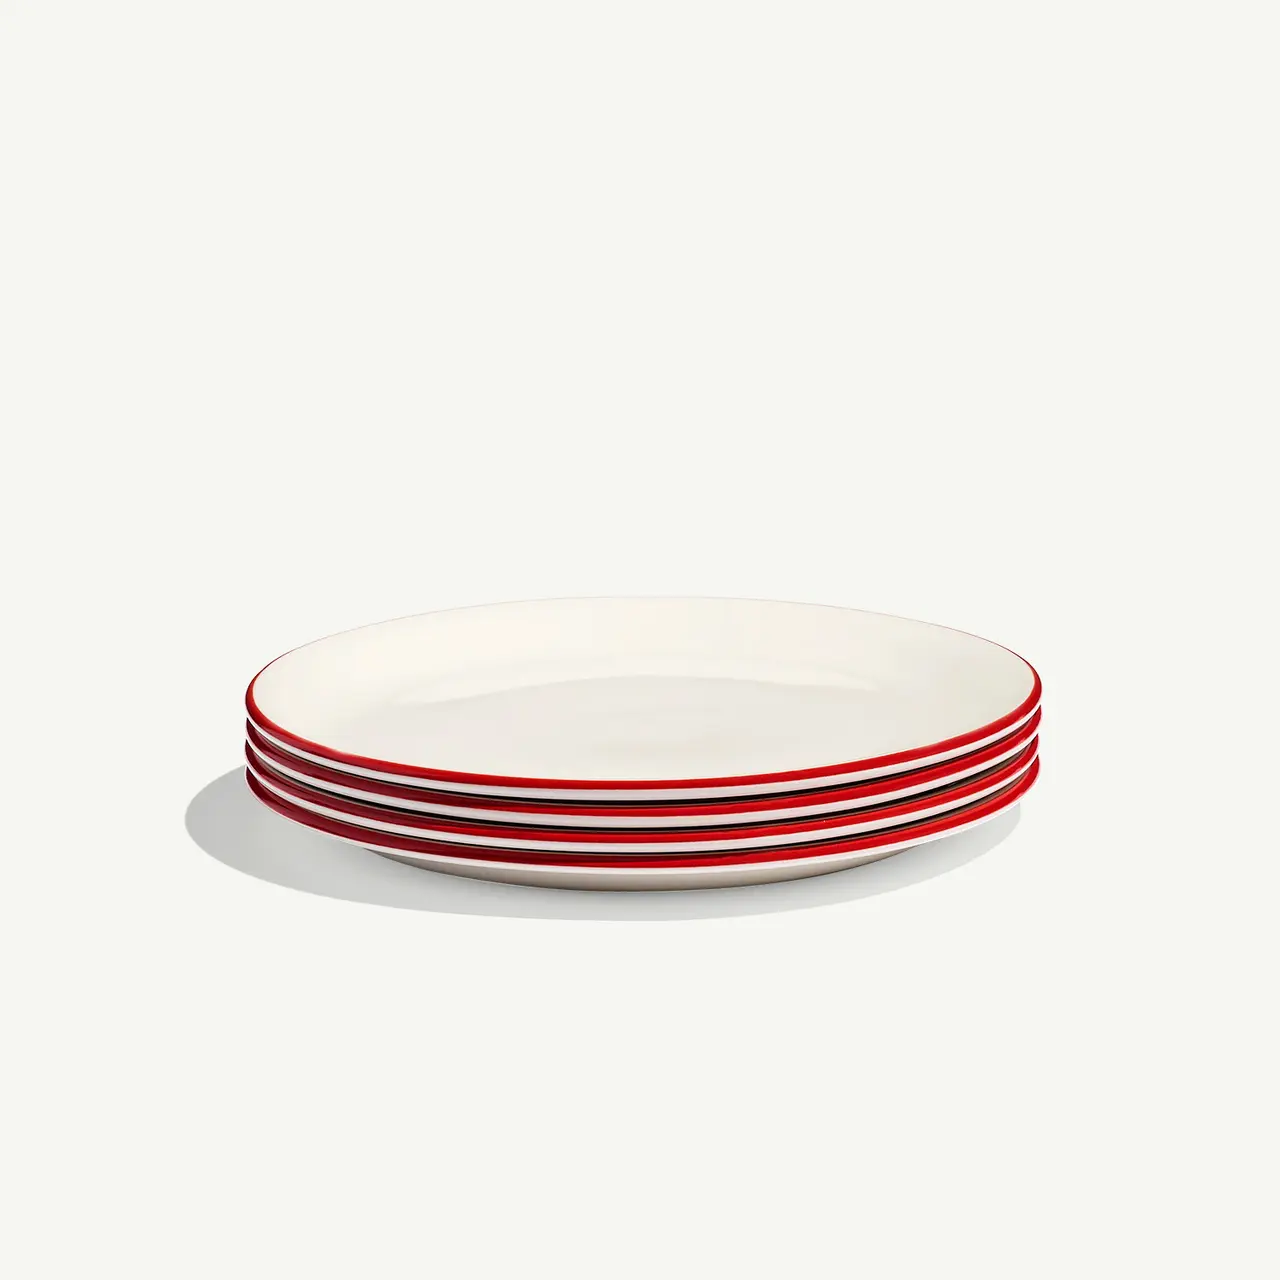 A stack of white plates with a single red stripe along the edge on a plain background.